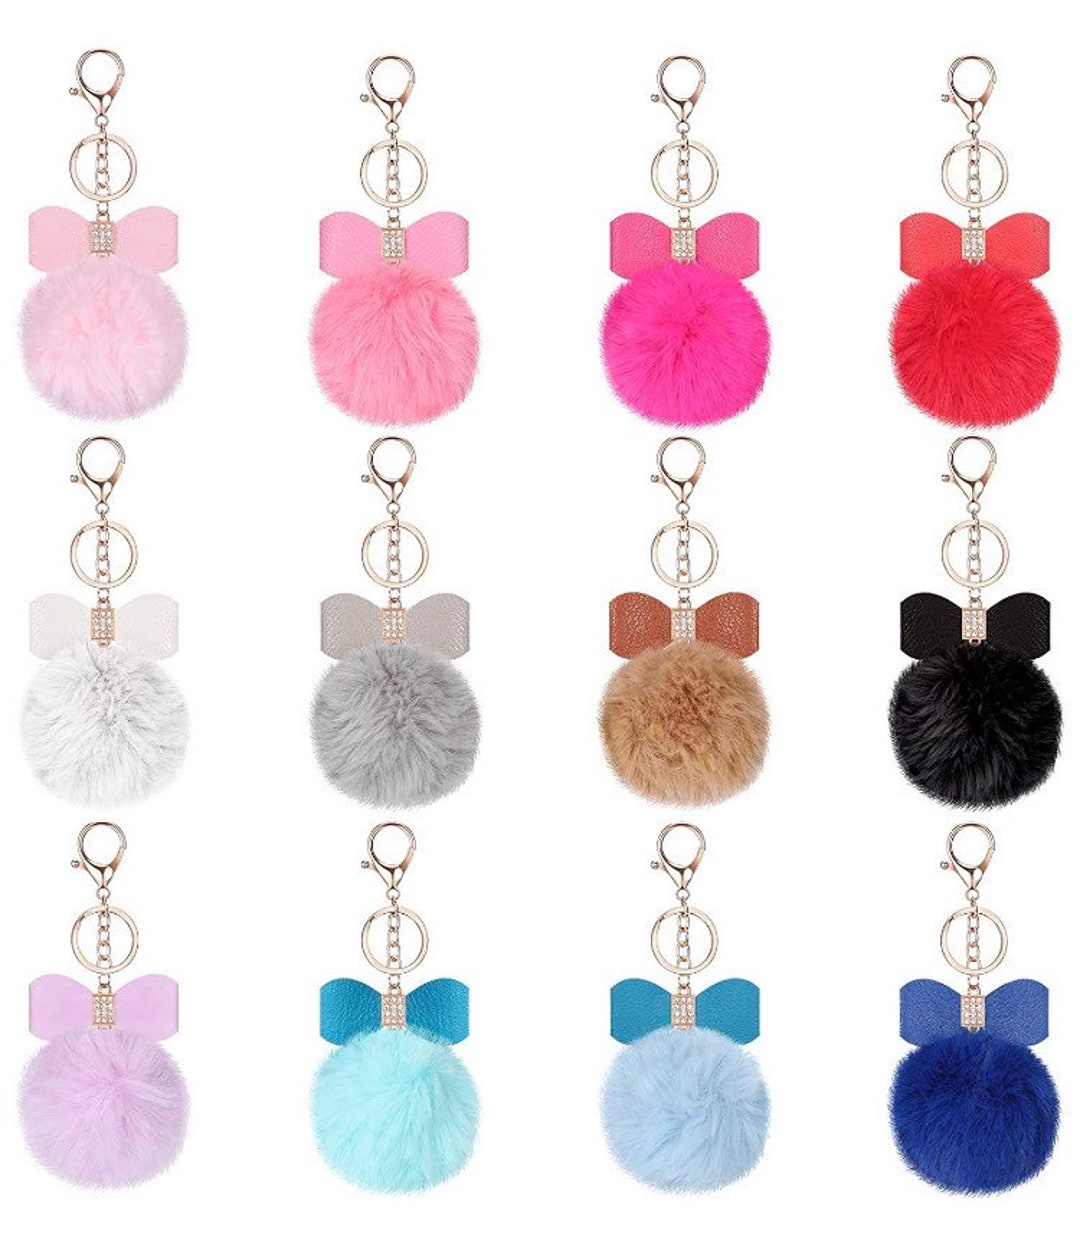 CrazyHouseTees Fuzzy Fluffy Heart Shape Pom Poms Key Ring Faux Rabbit Fur Pompoms, in The USA